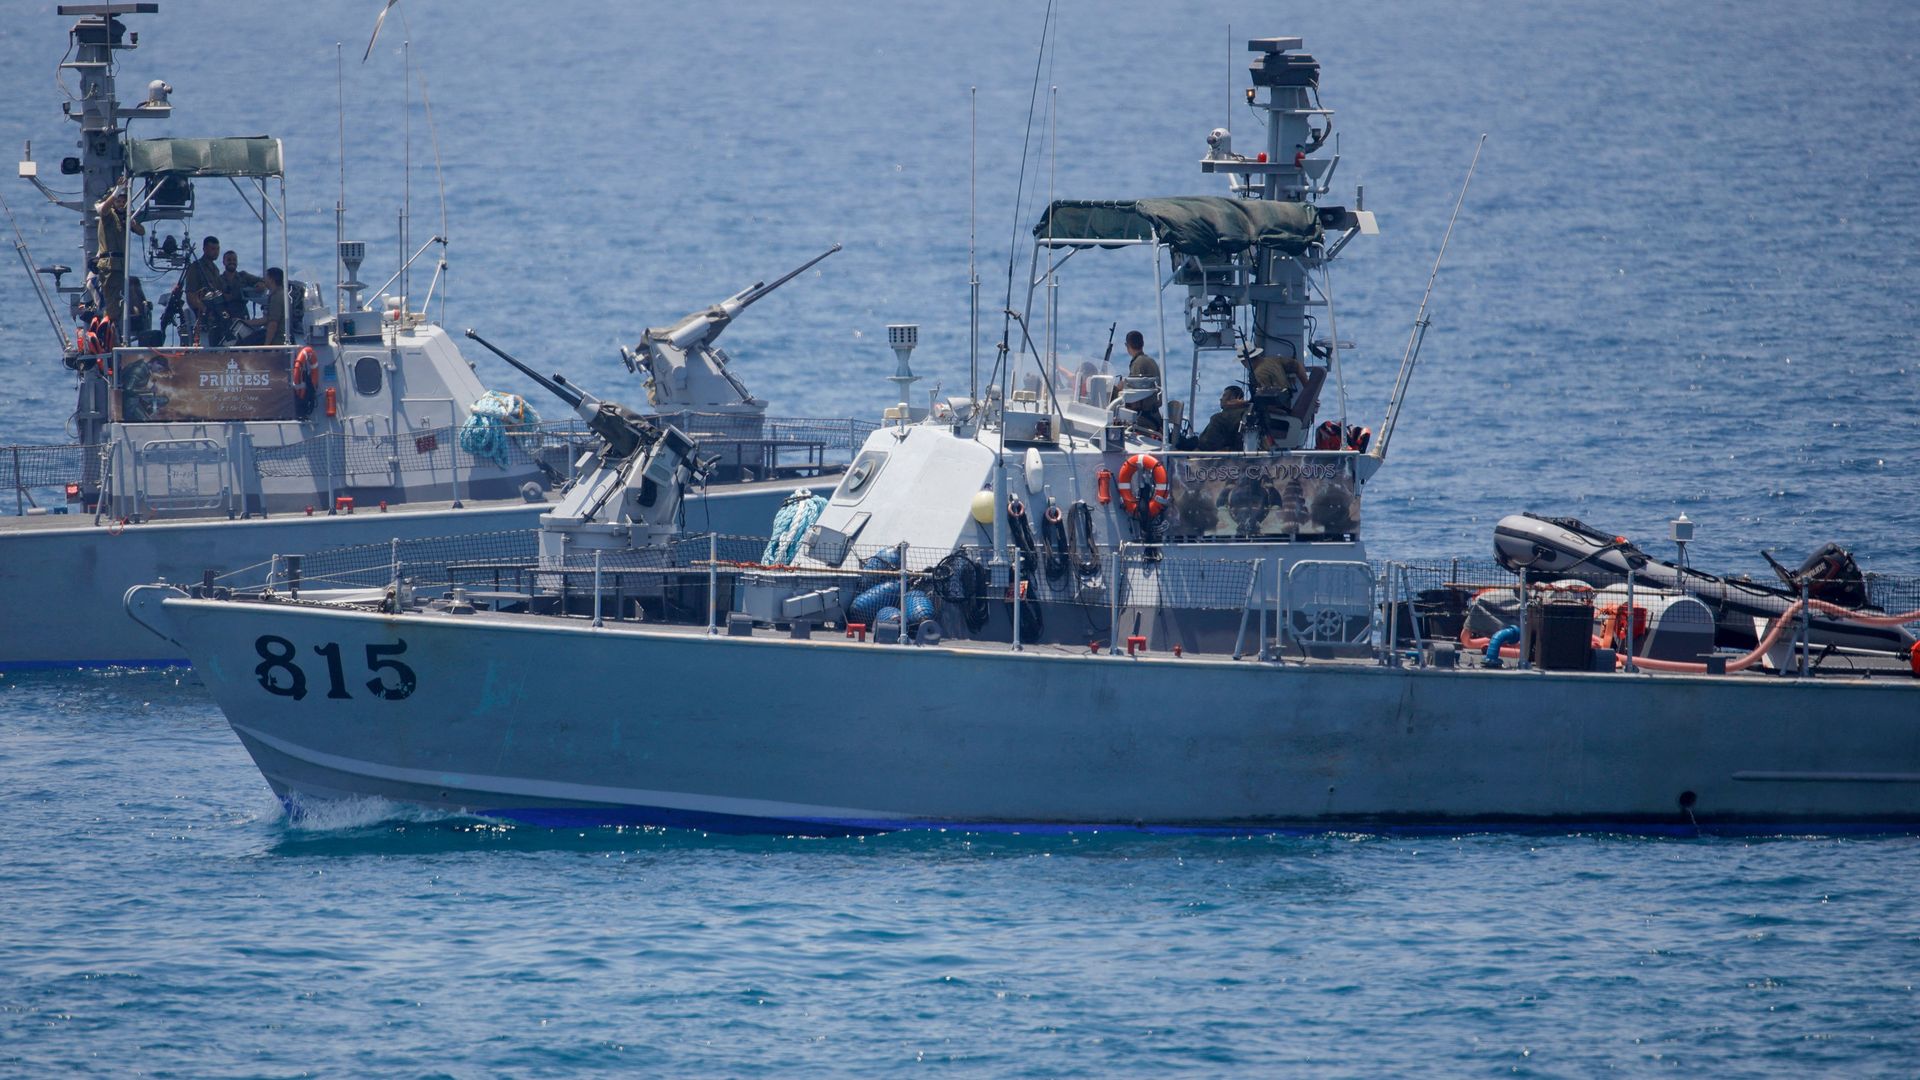 Israeli navy vessels are pictured off the coast of Rosh Hanikra, an area at the border between Israel and Lebanon (Ras al-Naqura), on June 6, 2022.